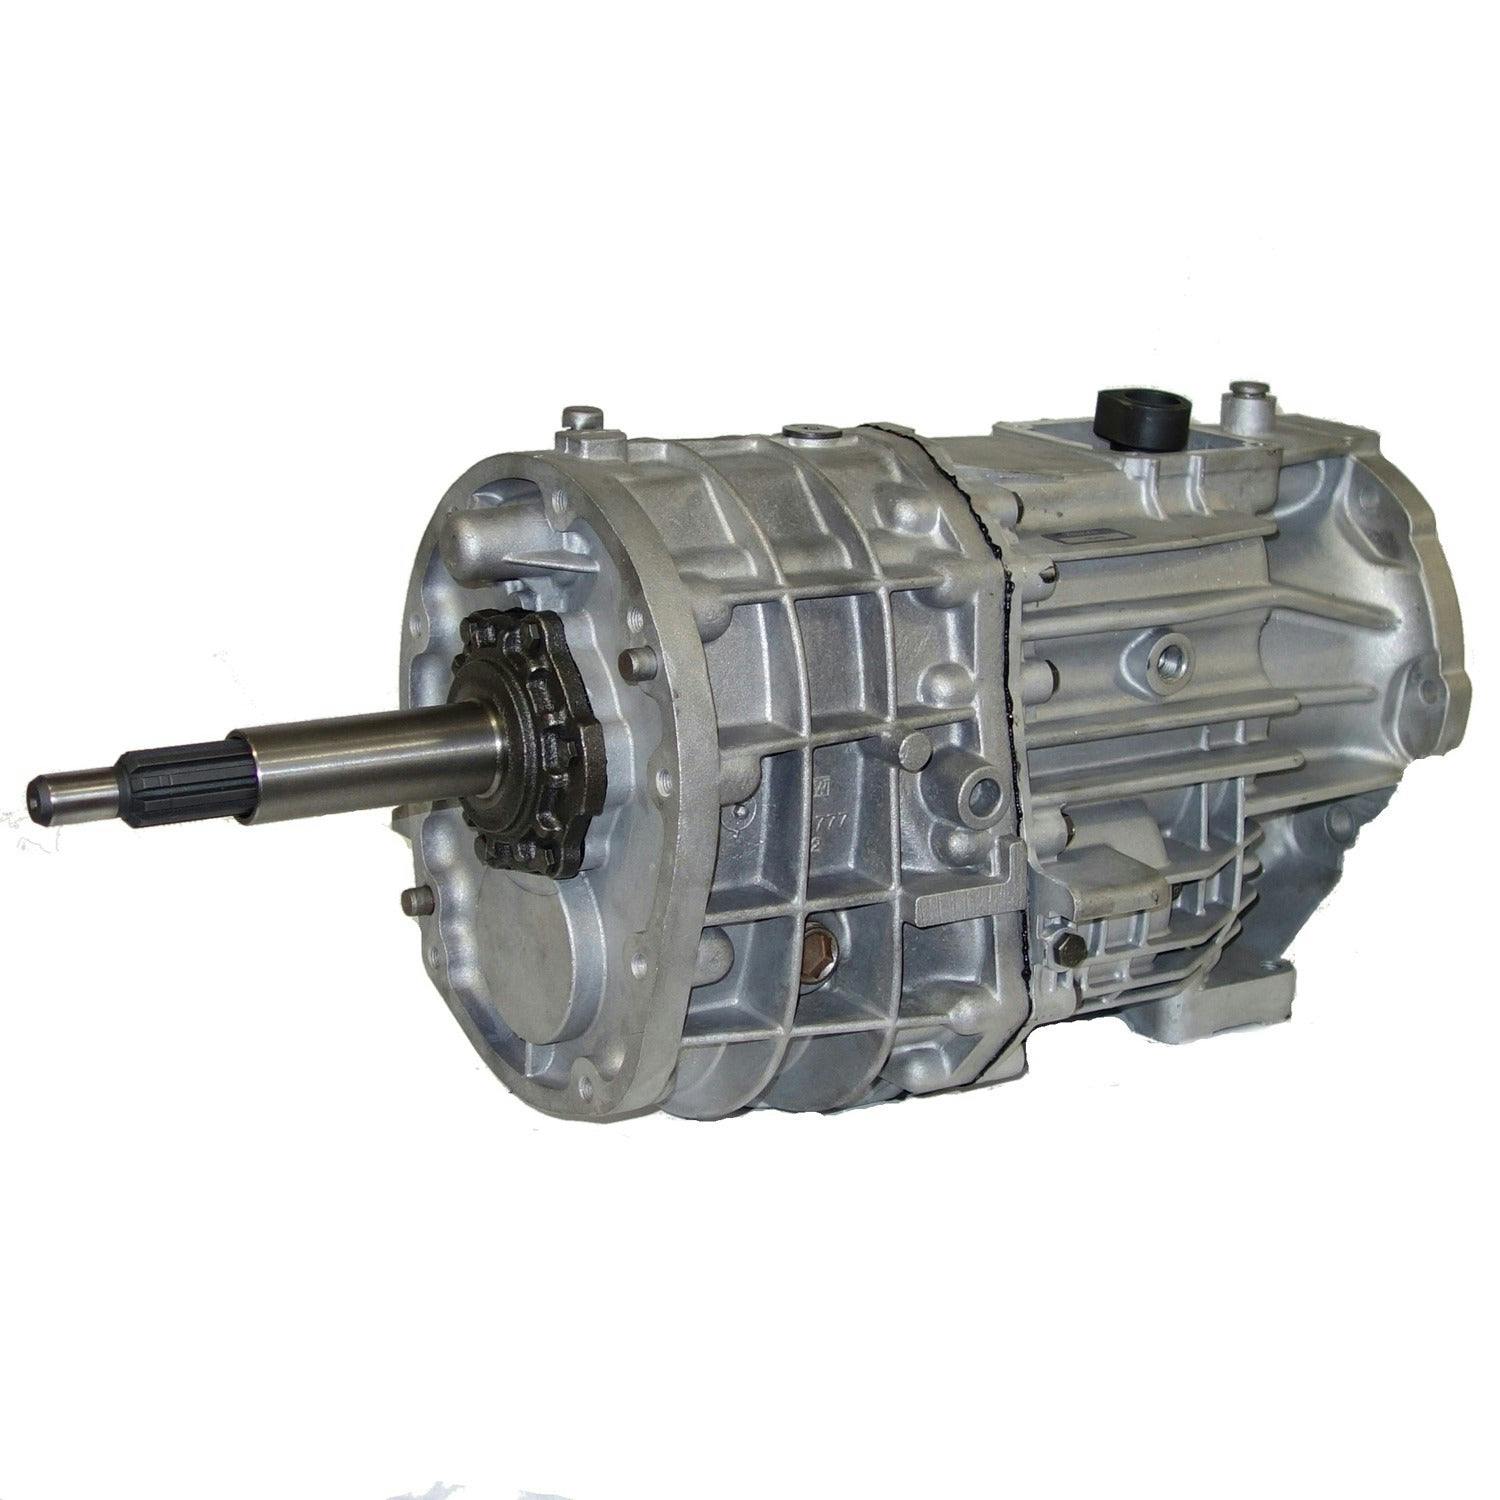 Manual Transmission for 2002-2004 Jeep Liberty RWD with 3.7L V6 Engine